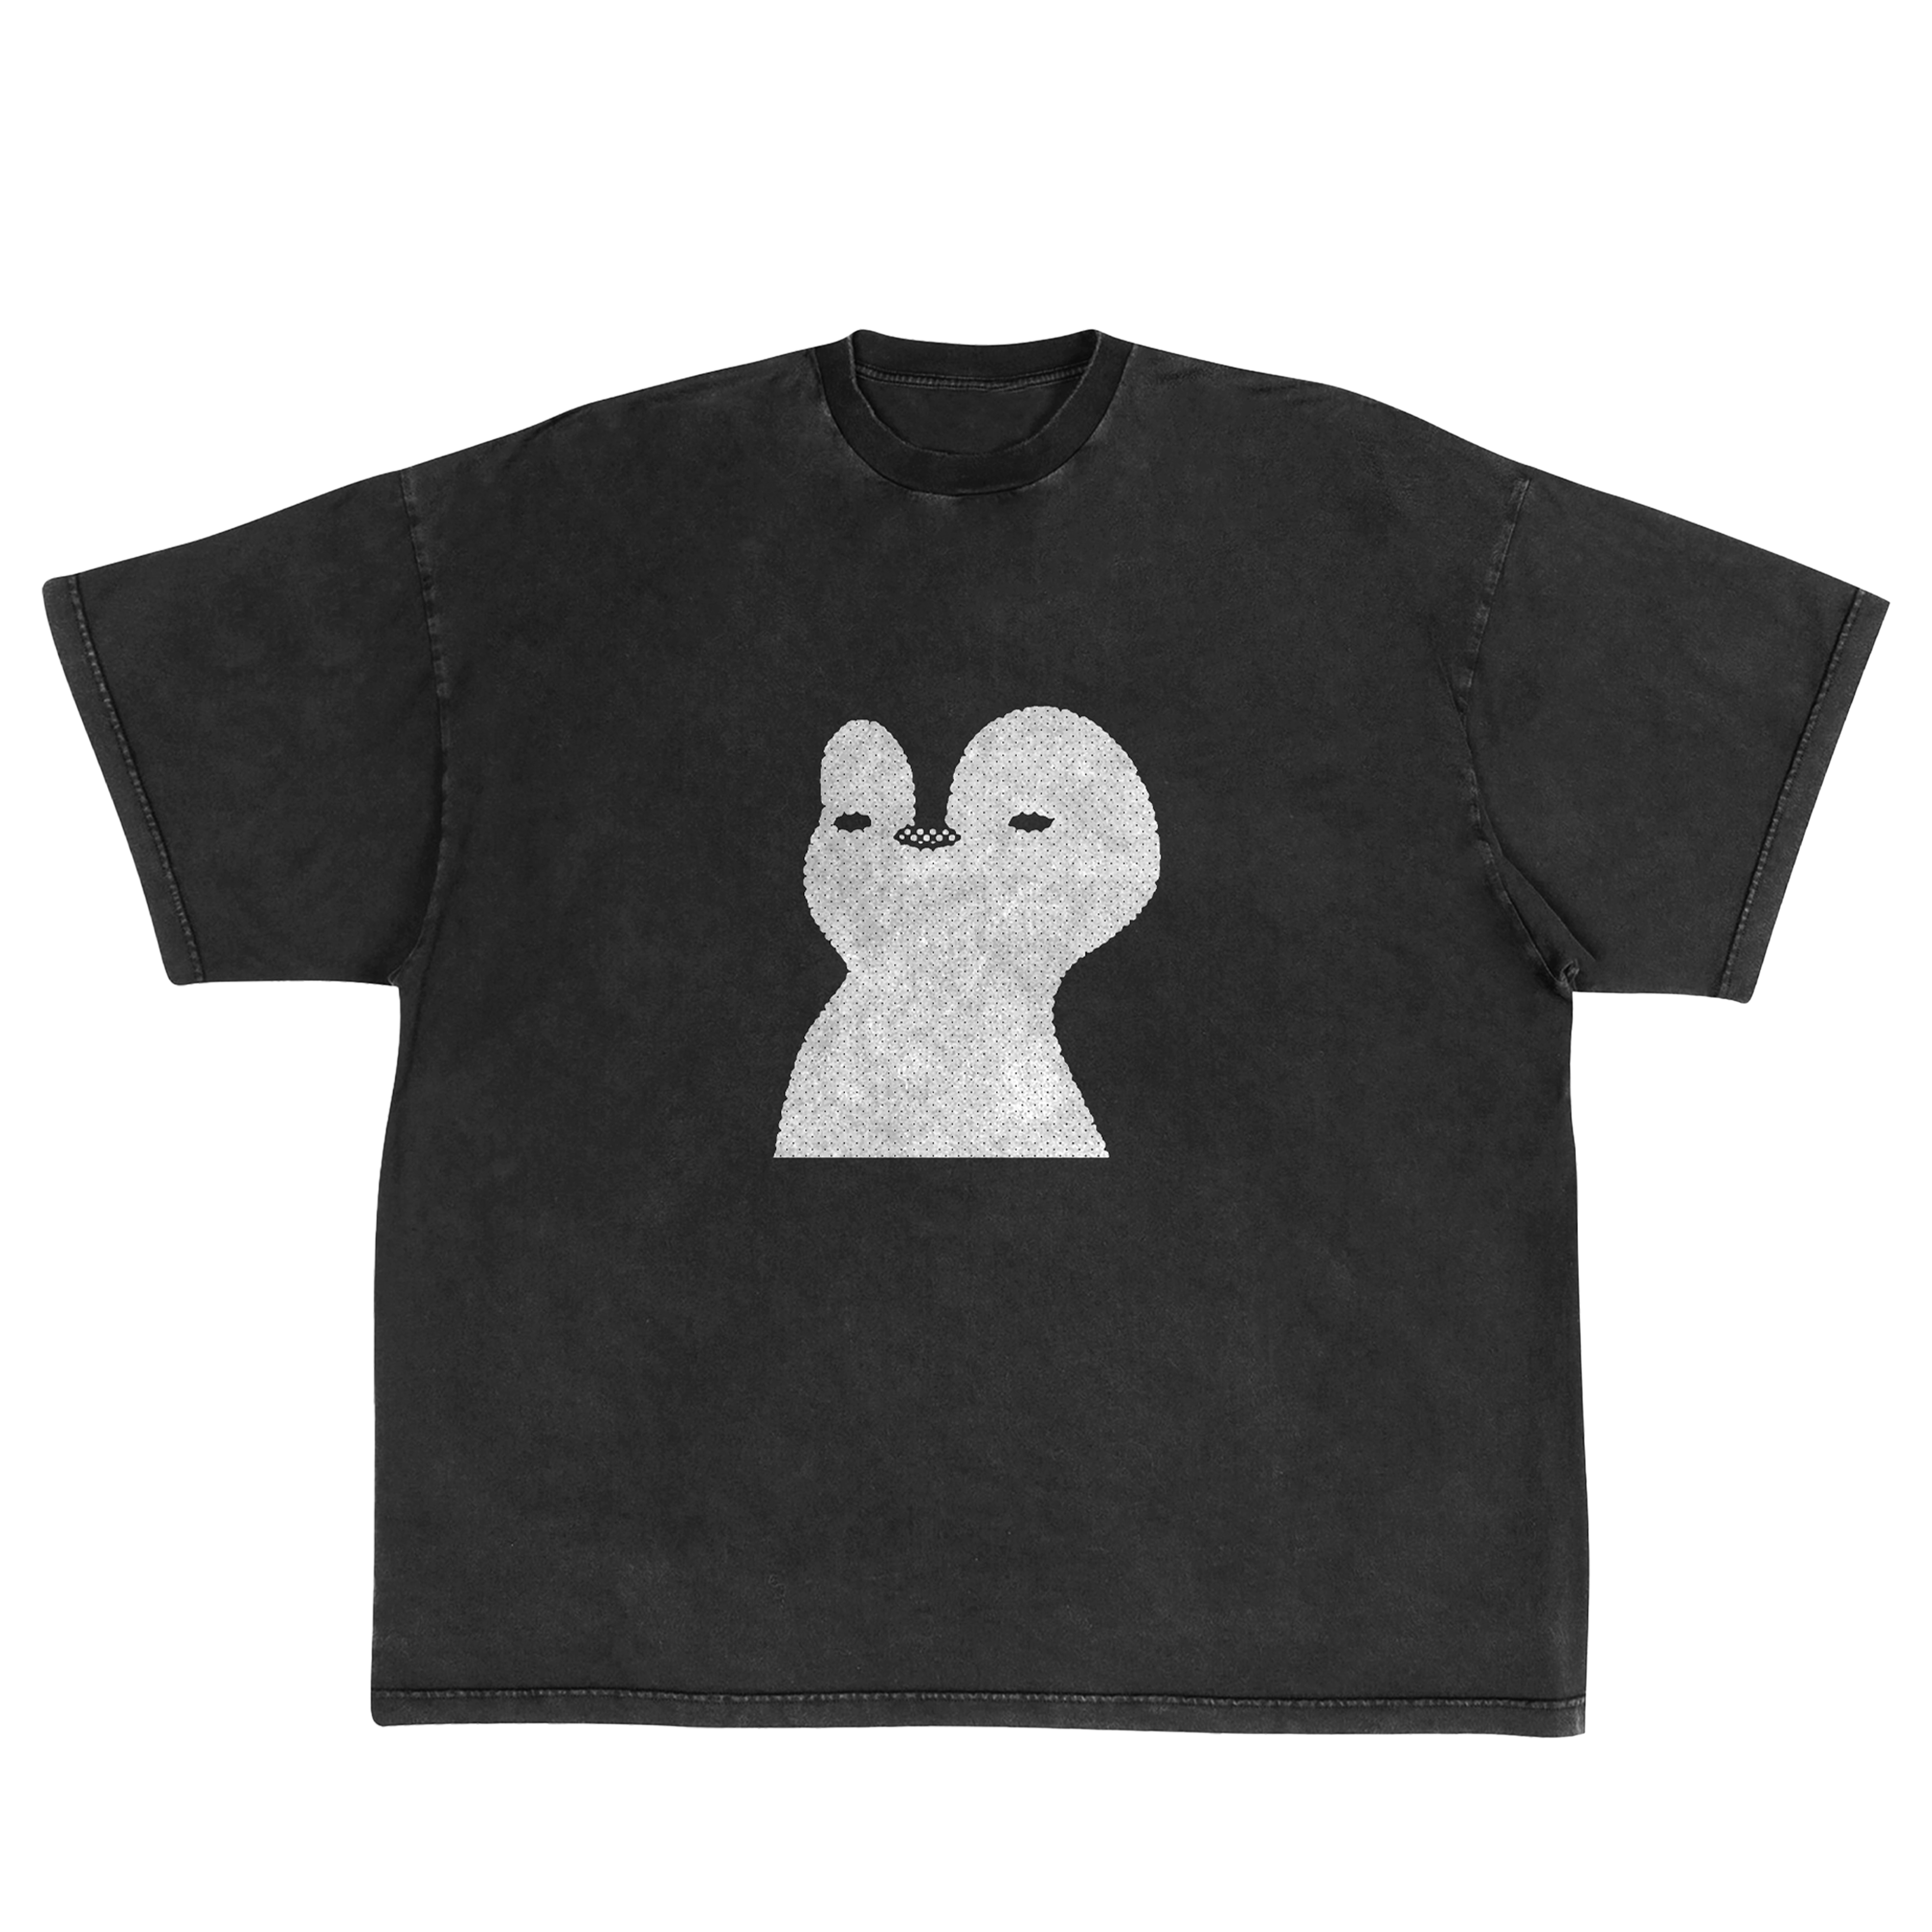 Pëngwin black oversized tee with a unique acid wash finish, embroidered penguin detail - a luxurious blend of style and comfort for fans of Balenciaga and Chrome Hearts aesthetics.